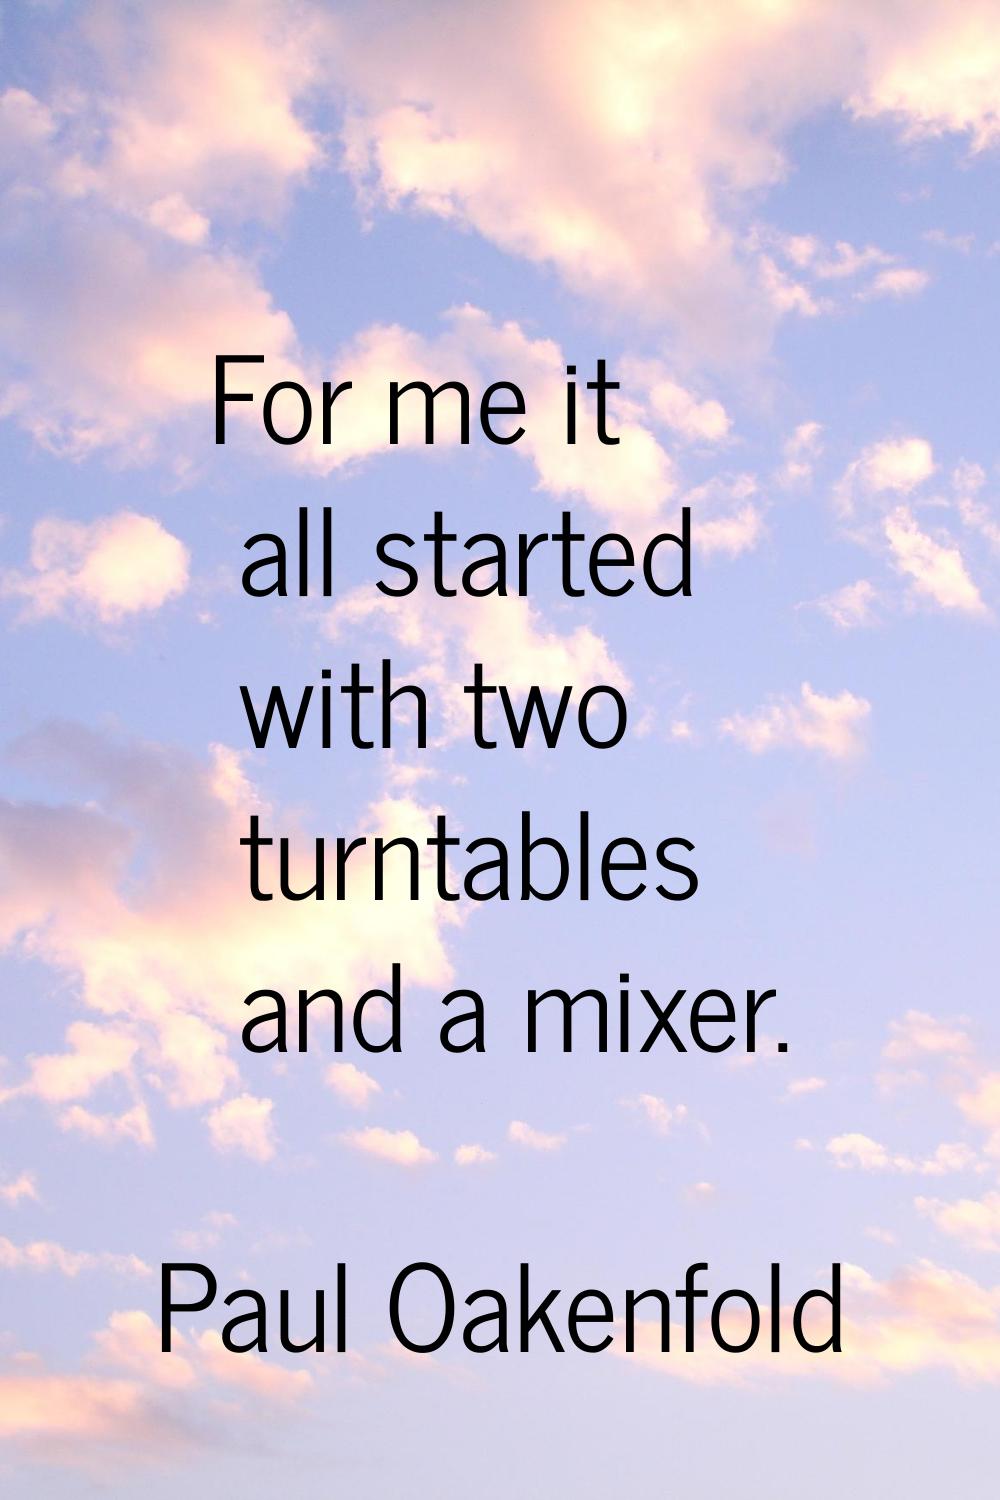 For me it all started with two turntables and a mixer.